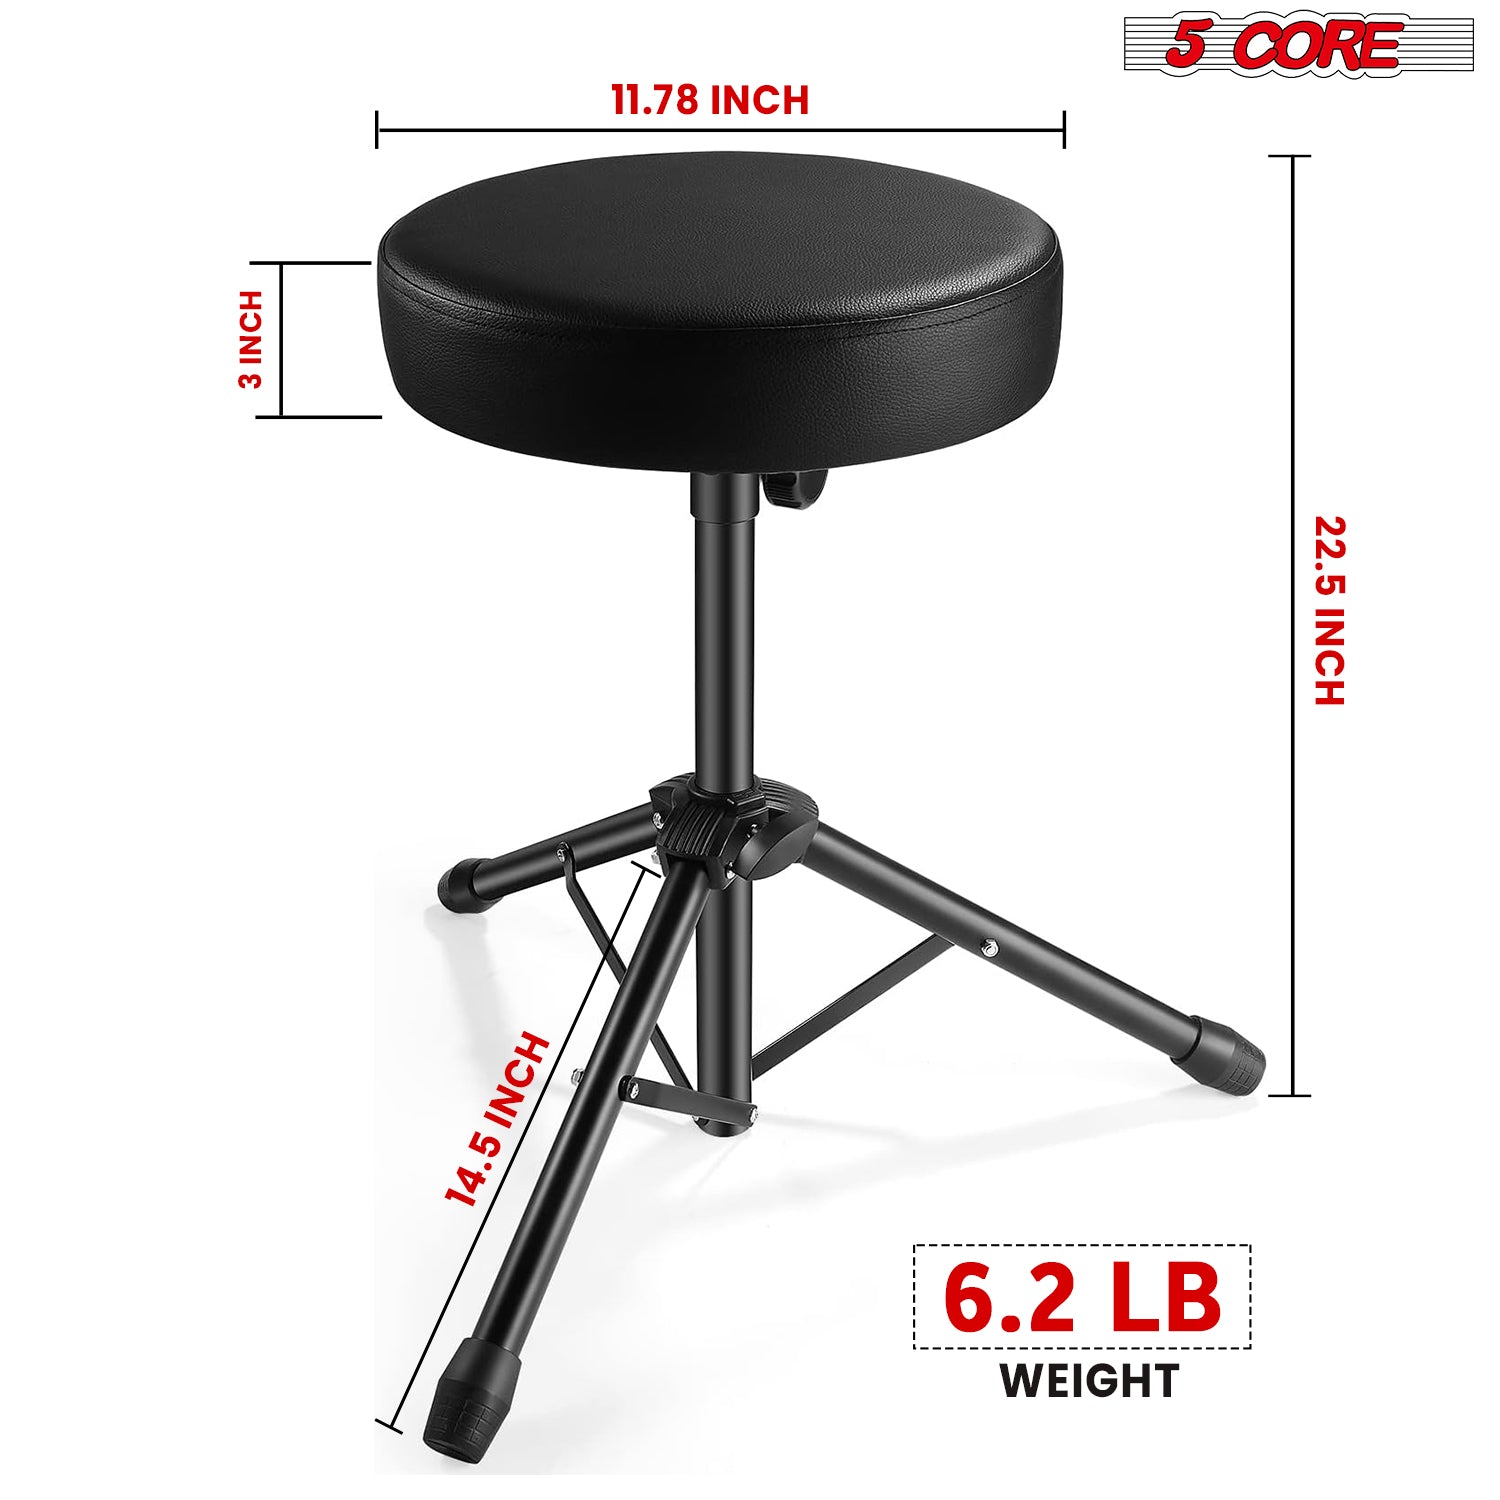 5 Core Drum Throne Height Adjustable guitar stool Thick Padded Memory Foam DJ Chair Seat with Anti Slip Feet Multipurpose Musician Chair for Adults and Kids Drummer Cello Guitar Player Black - DS 01 BLK